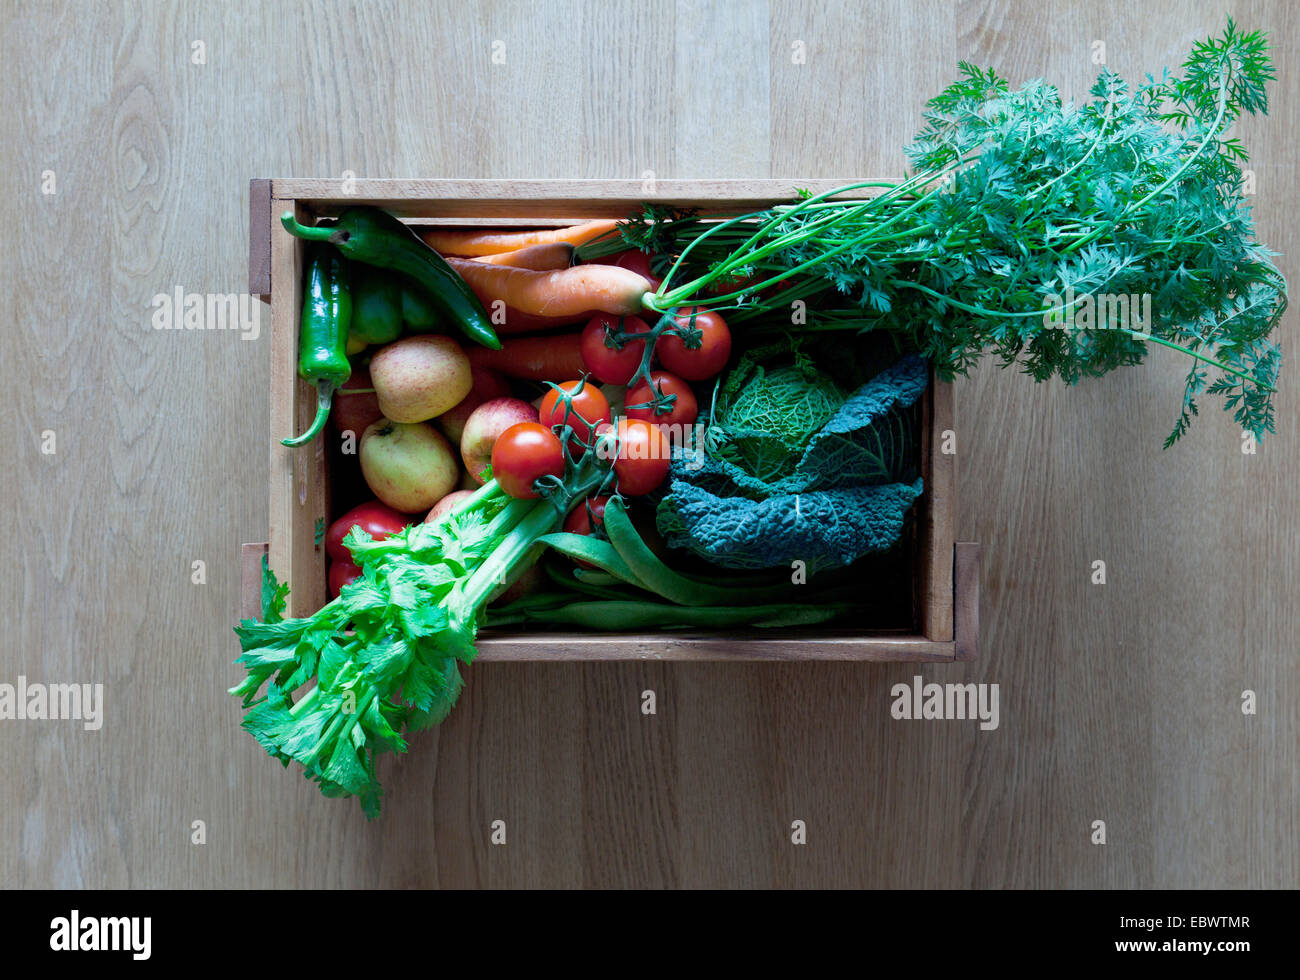 Organic vegetables and fruit in a wooden box Stock Photo